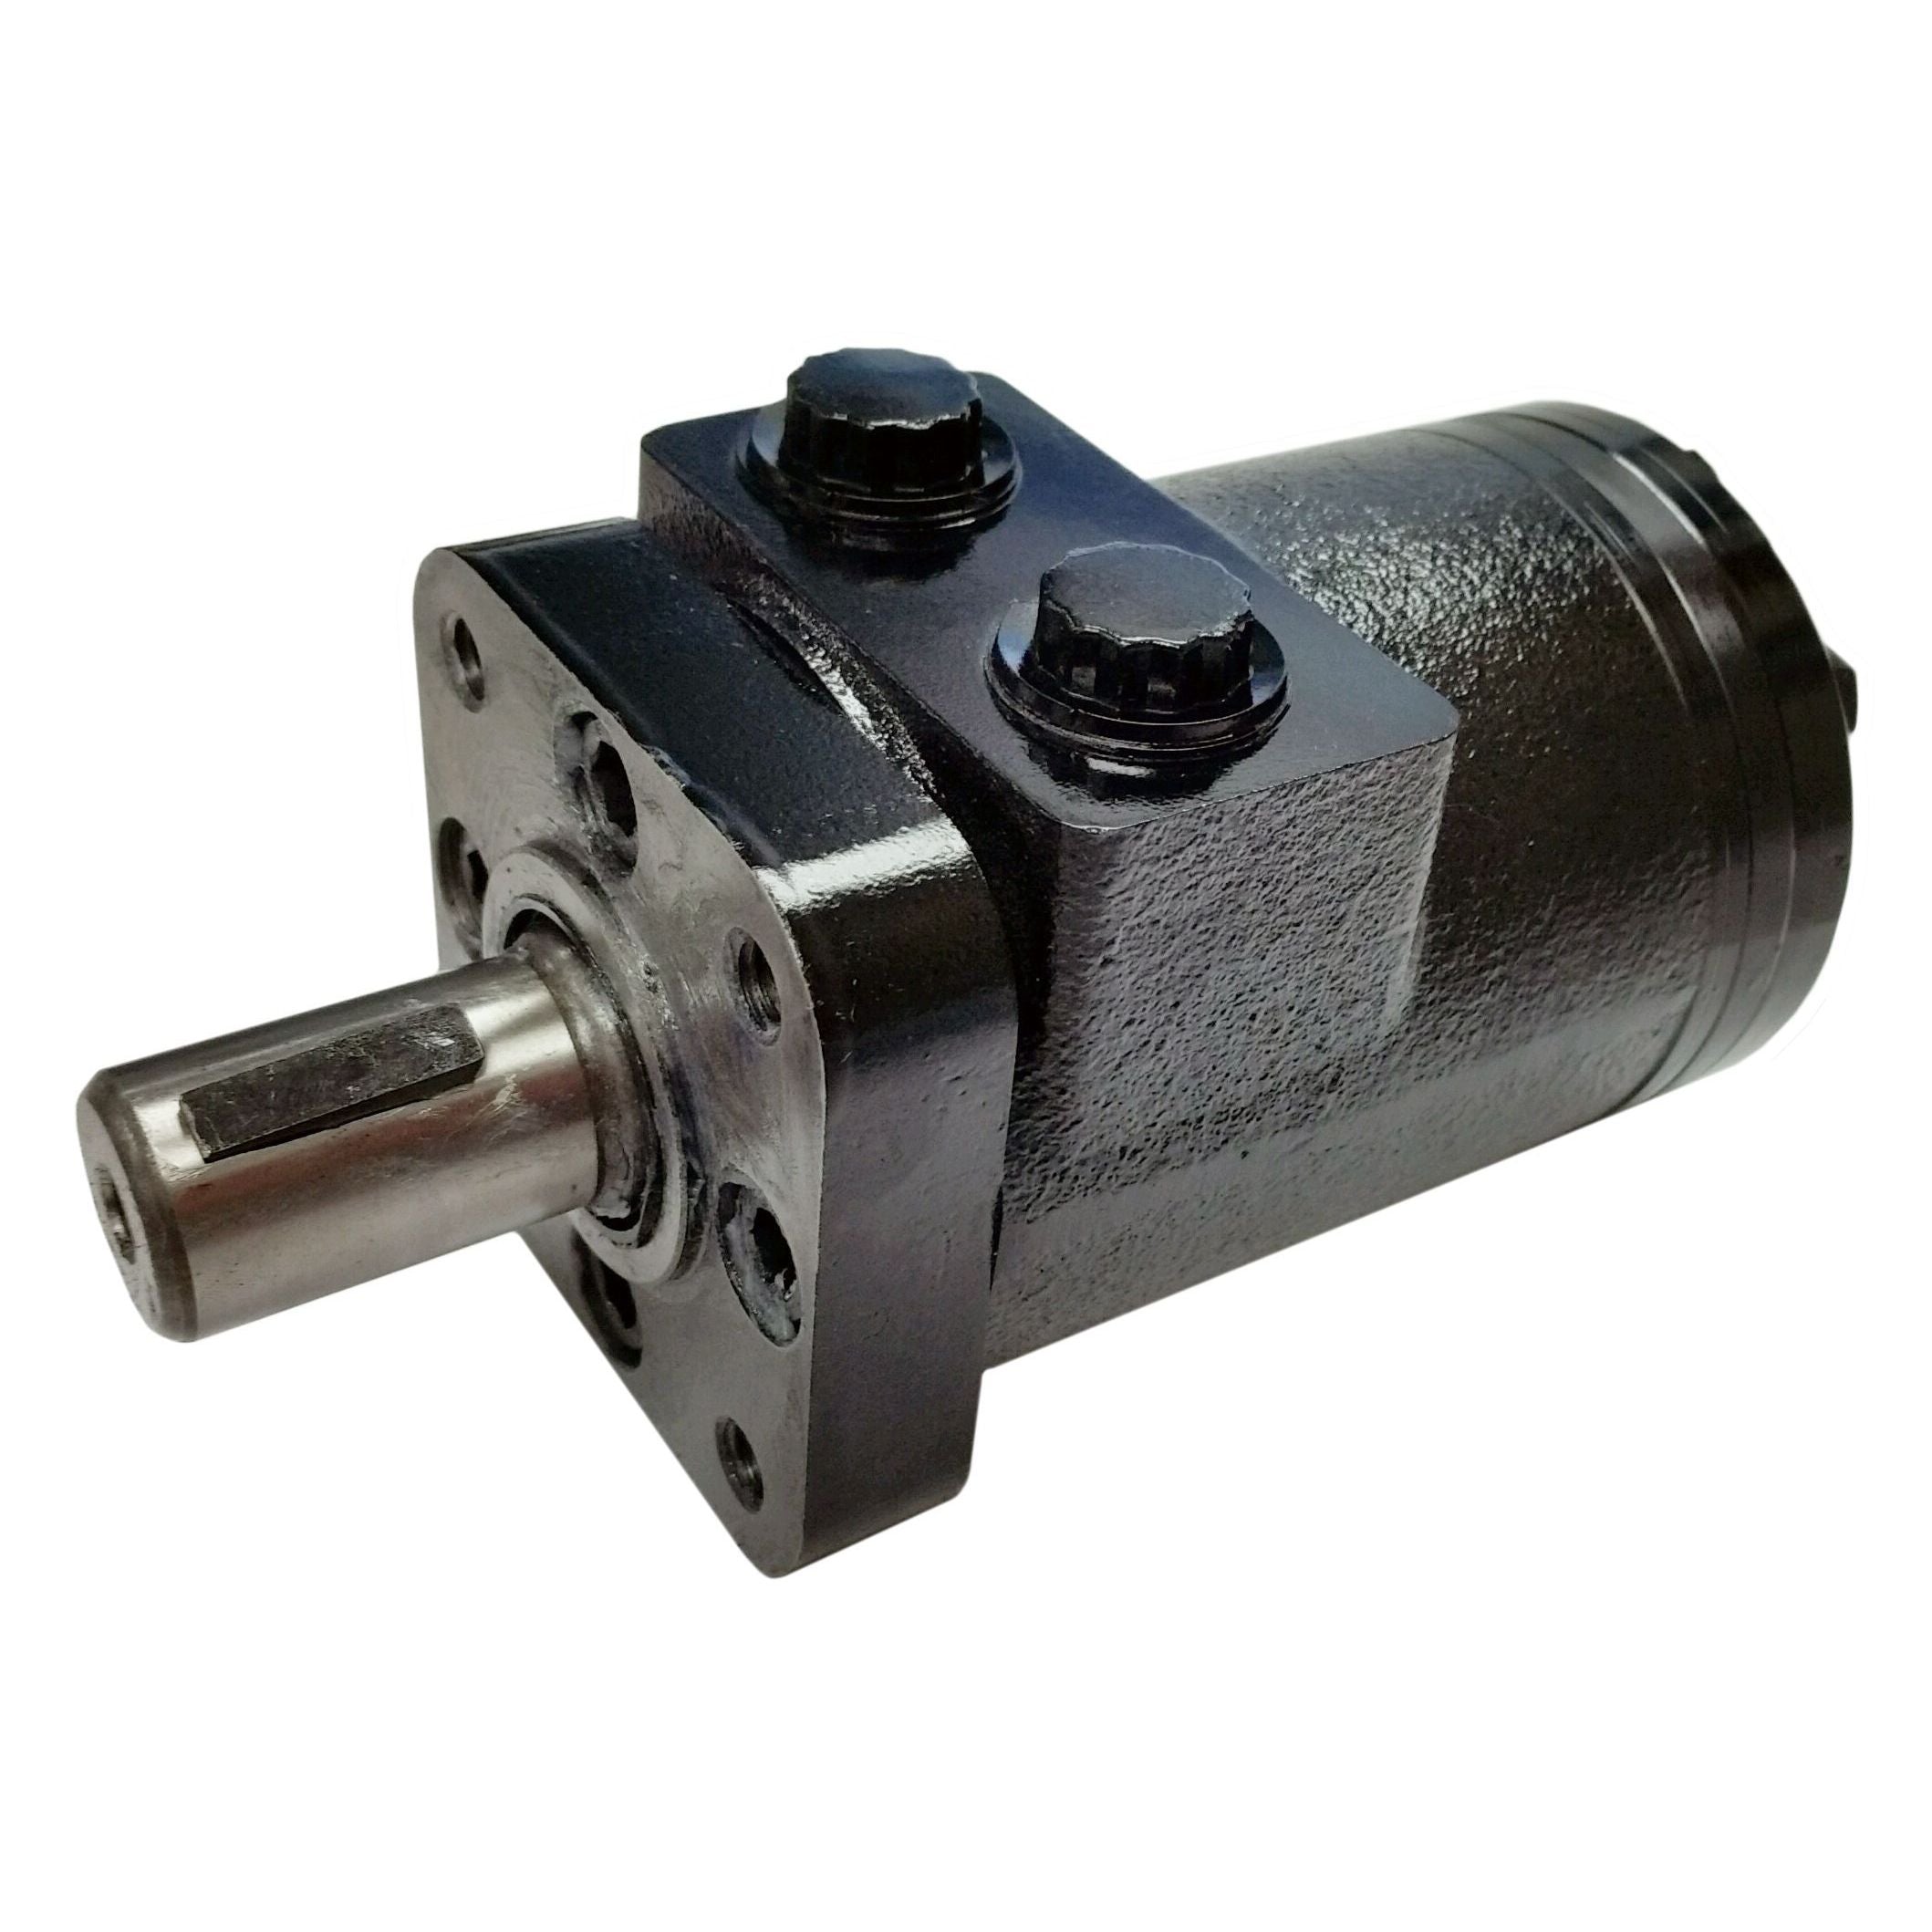 BMPH-400-H4-K-F : Dynamic LSHT Motor, 390cc, 155RPM, 3186in-lb, 1450psi Differential, 15.85GPM, SAE A 4-Bolt Mount, 1" Bore x 1/4" Key Shaft, Side Ported, Manifold